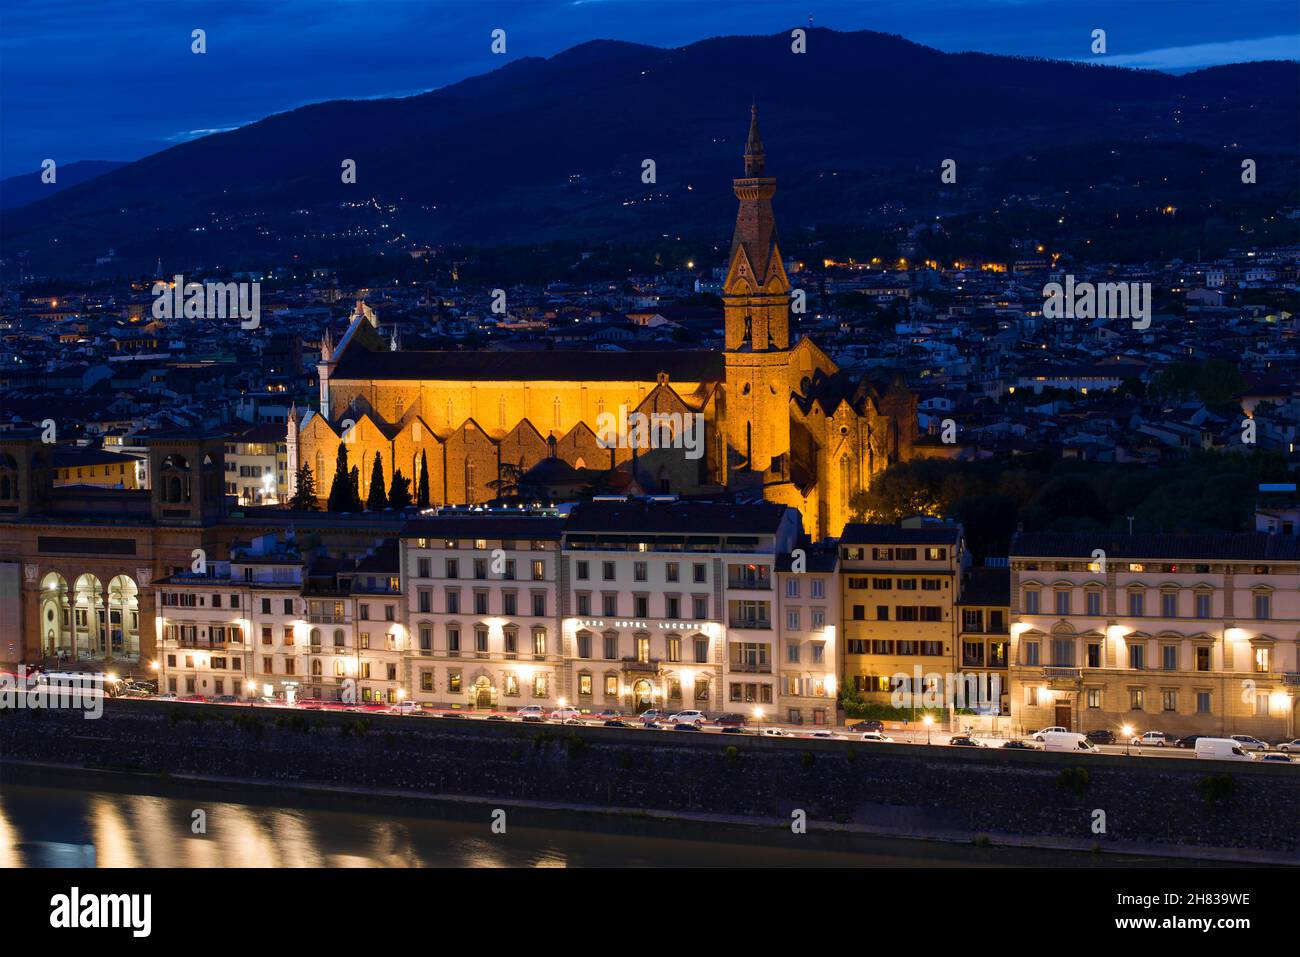 FLORENCE, ITALY - SEPTEMBER 19, 2017: Basilica di Santa Croce (Church of the Holy Cross) in the night scenery Stock Photo